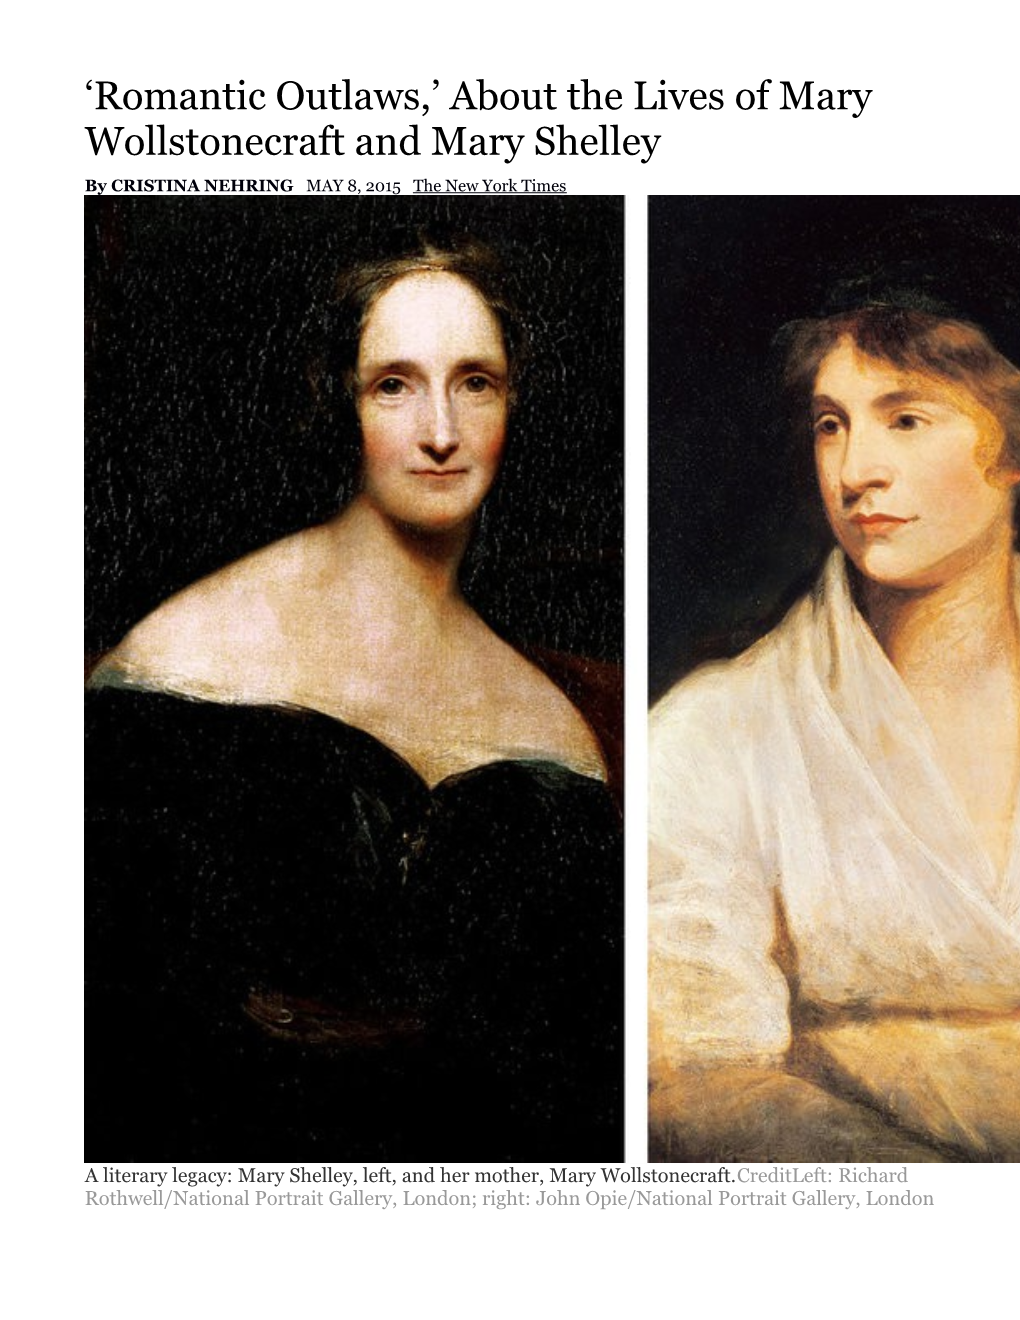 Romantic Outlaws, About the Lives of Mary Wollstonecraft and Mary Shelley